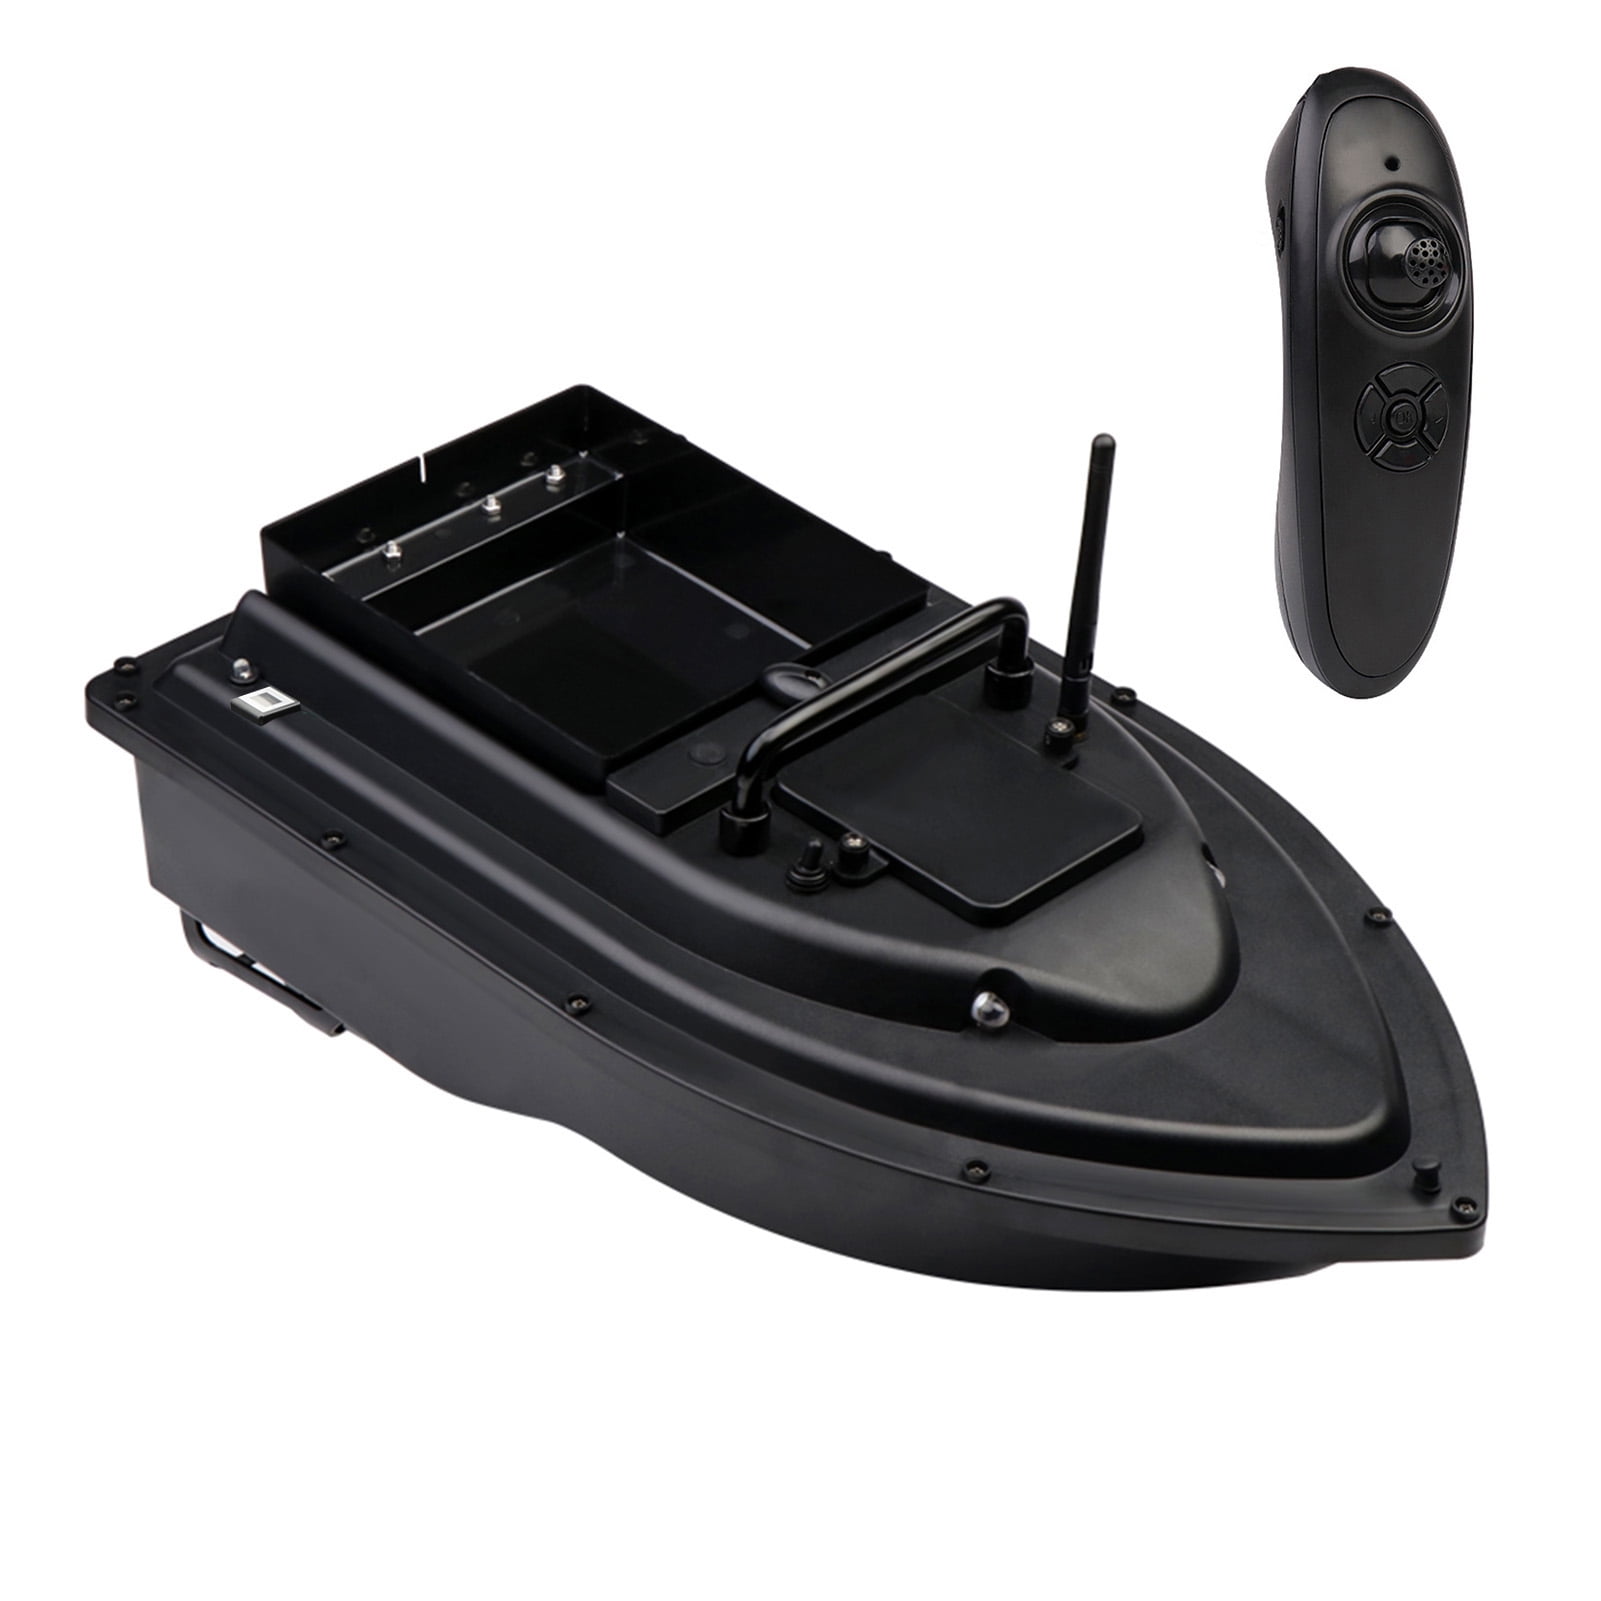 OWSOO RC Fishing Bait Boat RC Boat Fish Finder 0.75kg Loading 500M